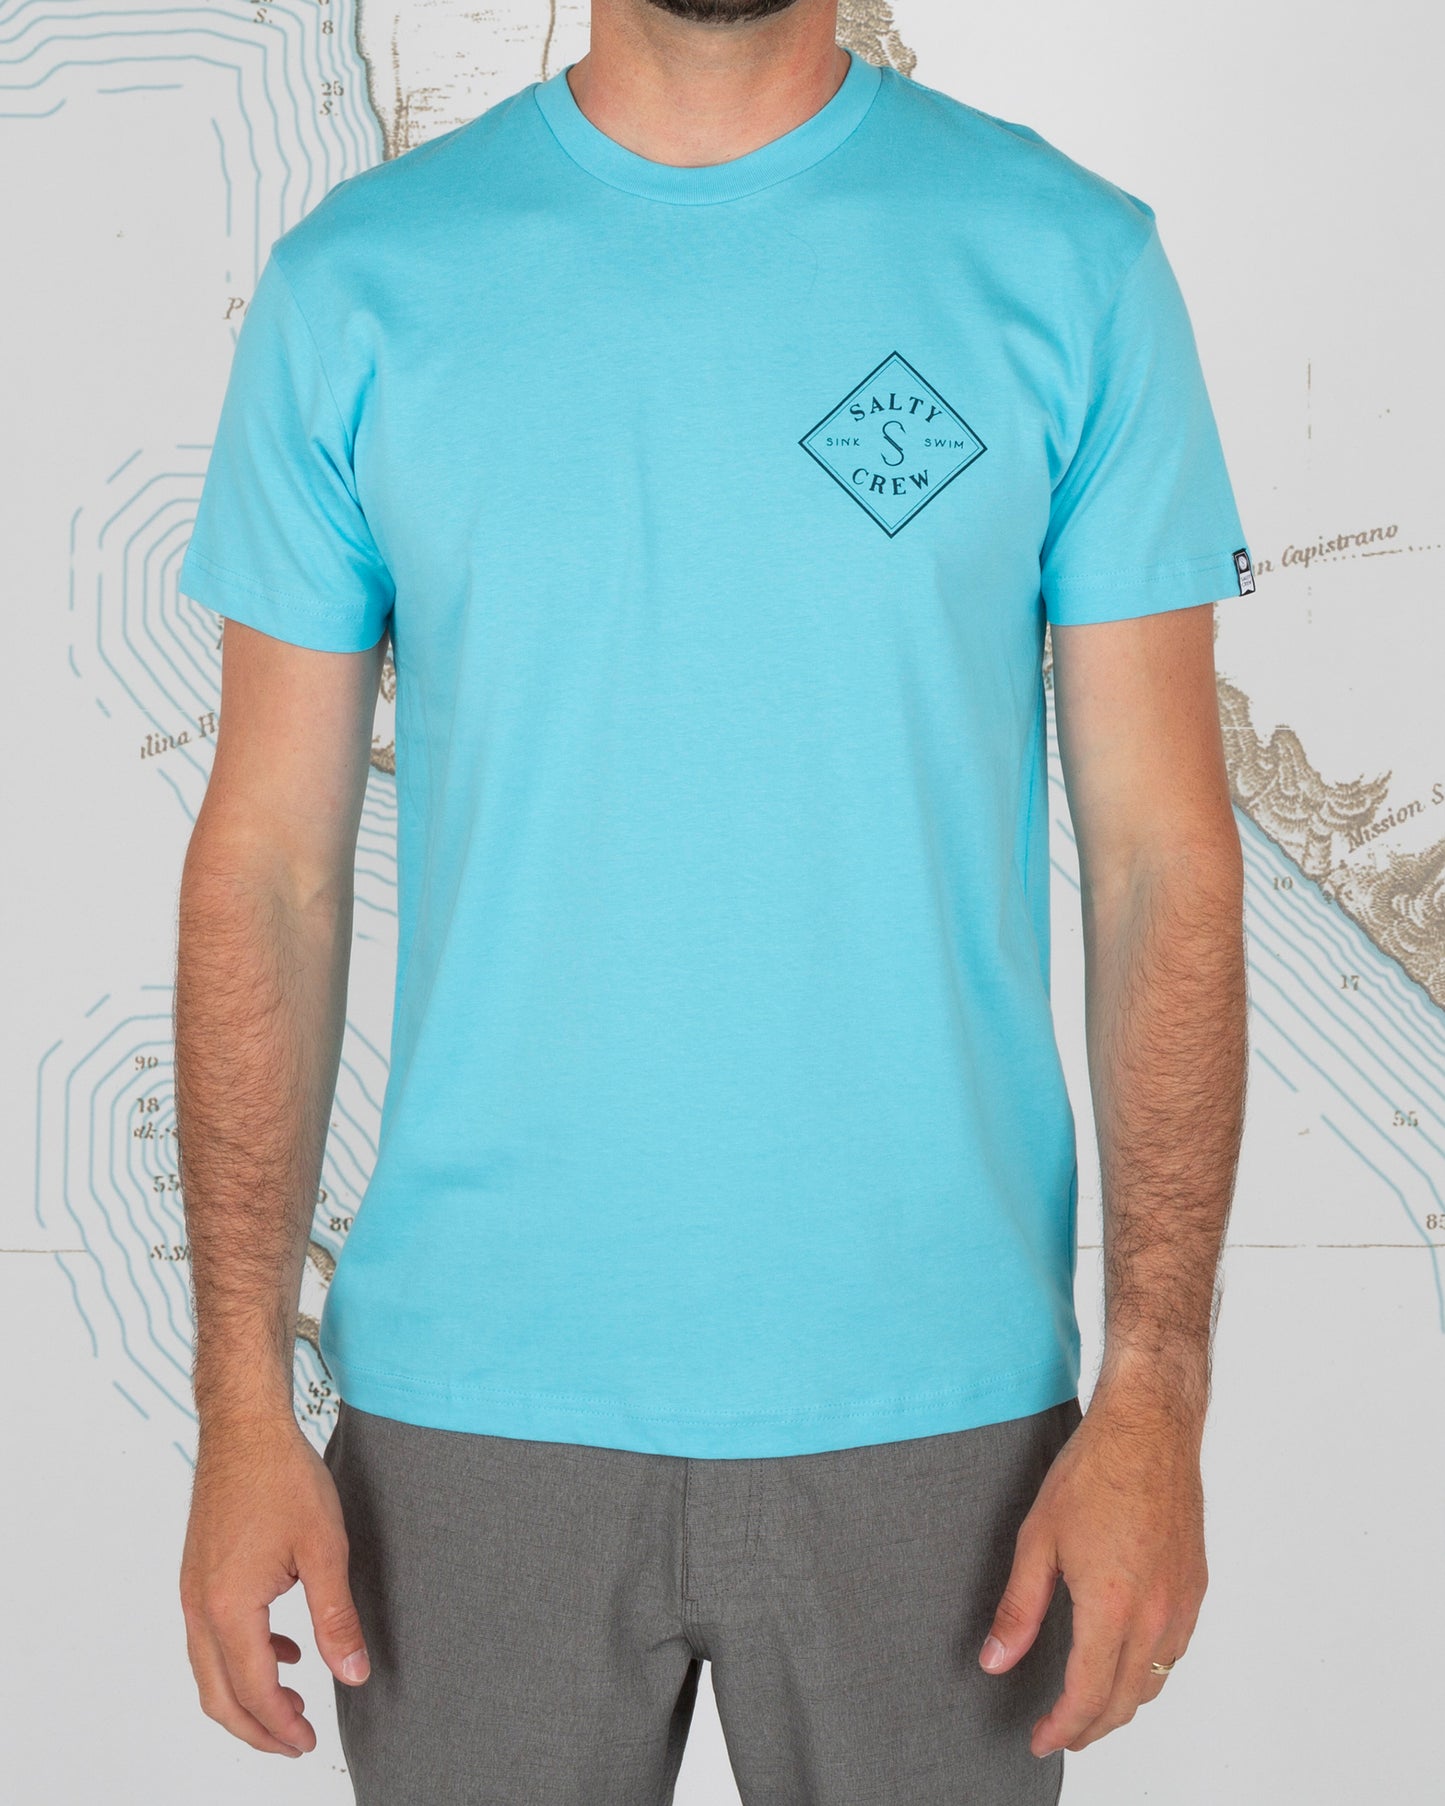 On body front of Tippet Pacific Blue Premium S/S Tee